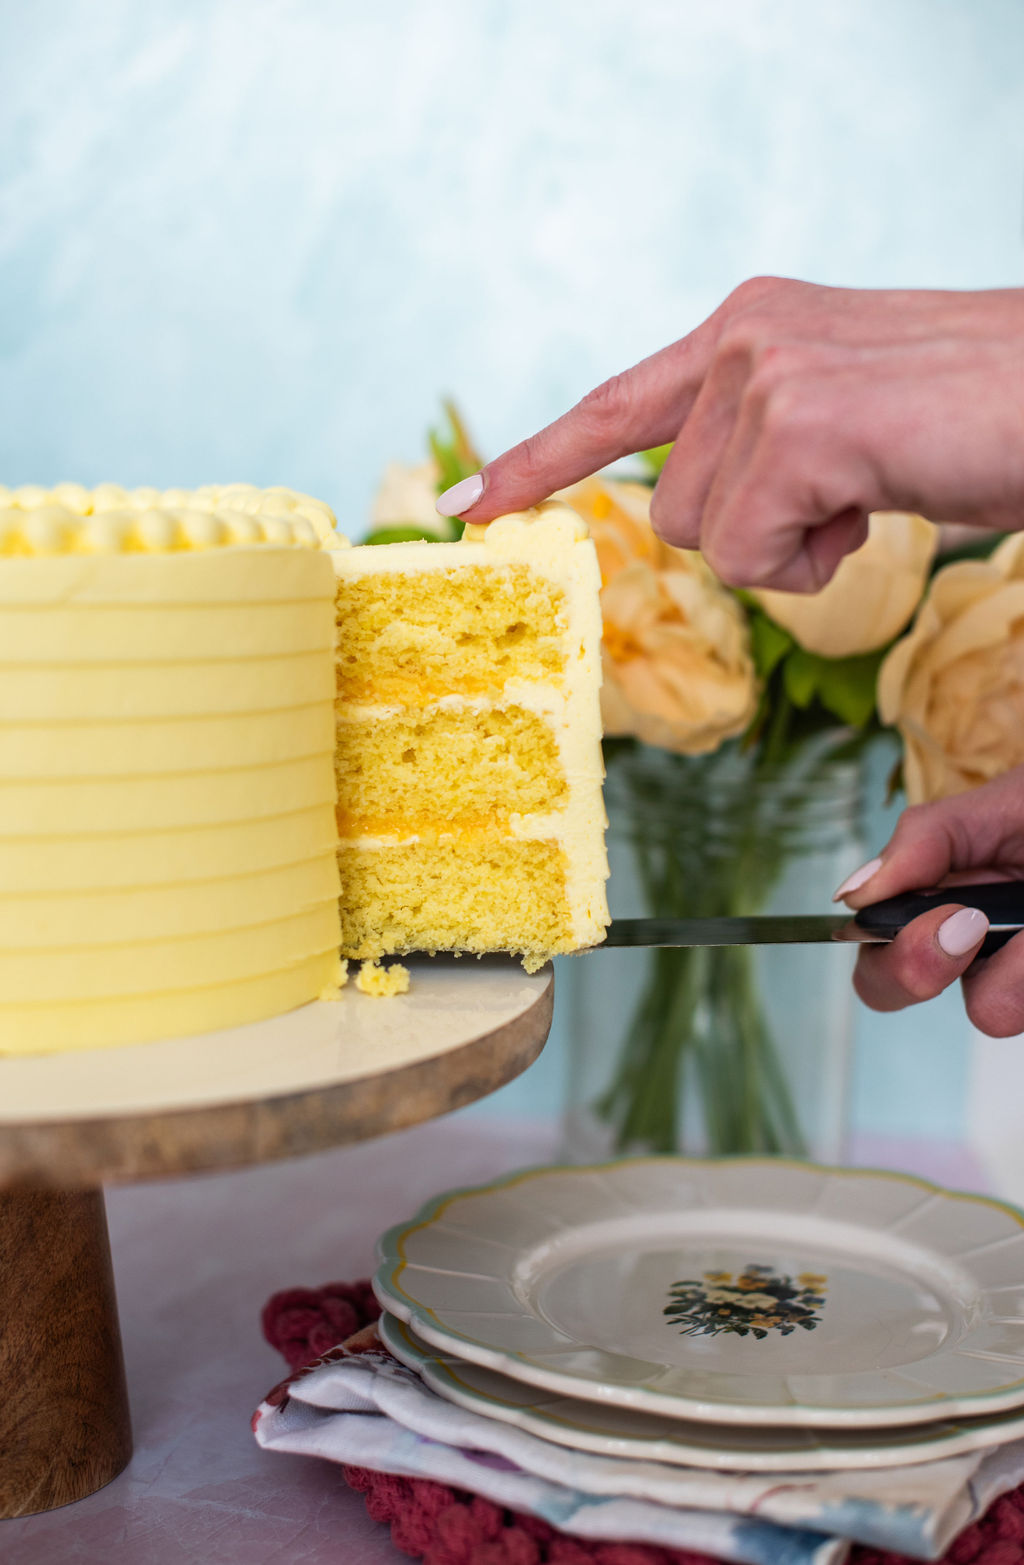 Taking a slice out of a whole lemon cake.